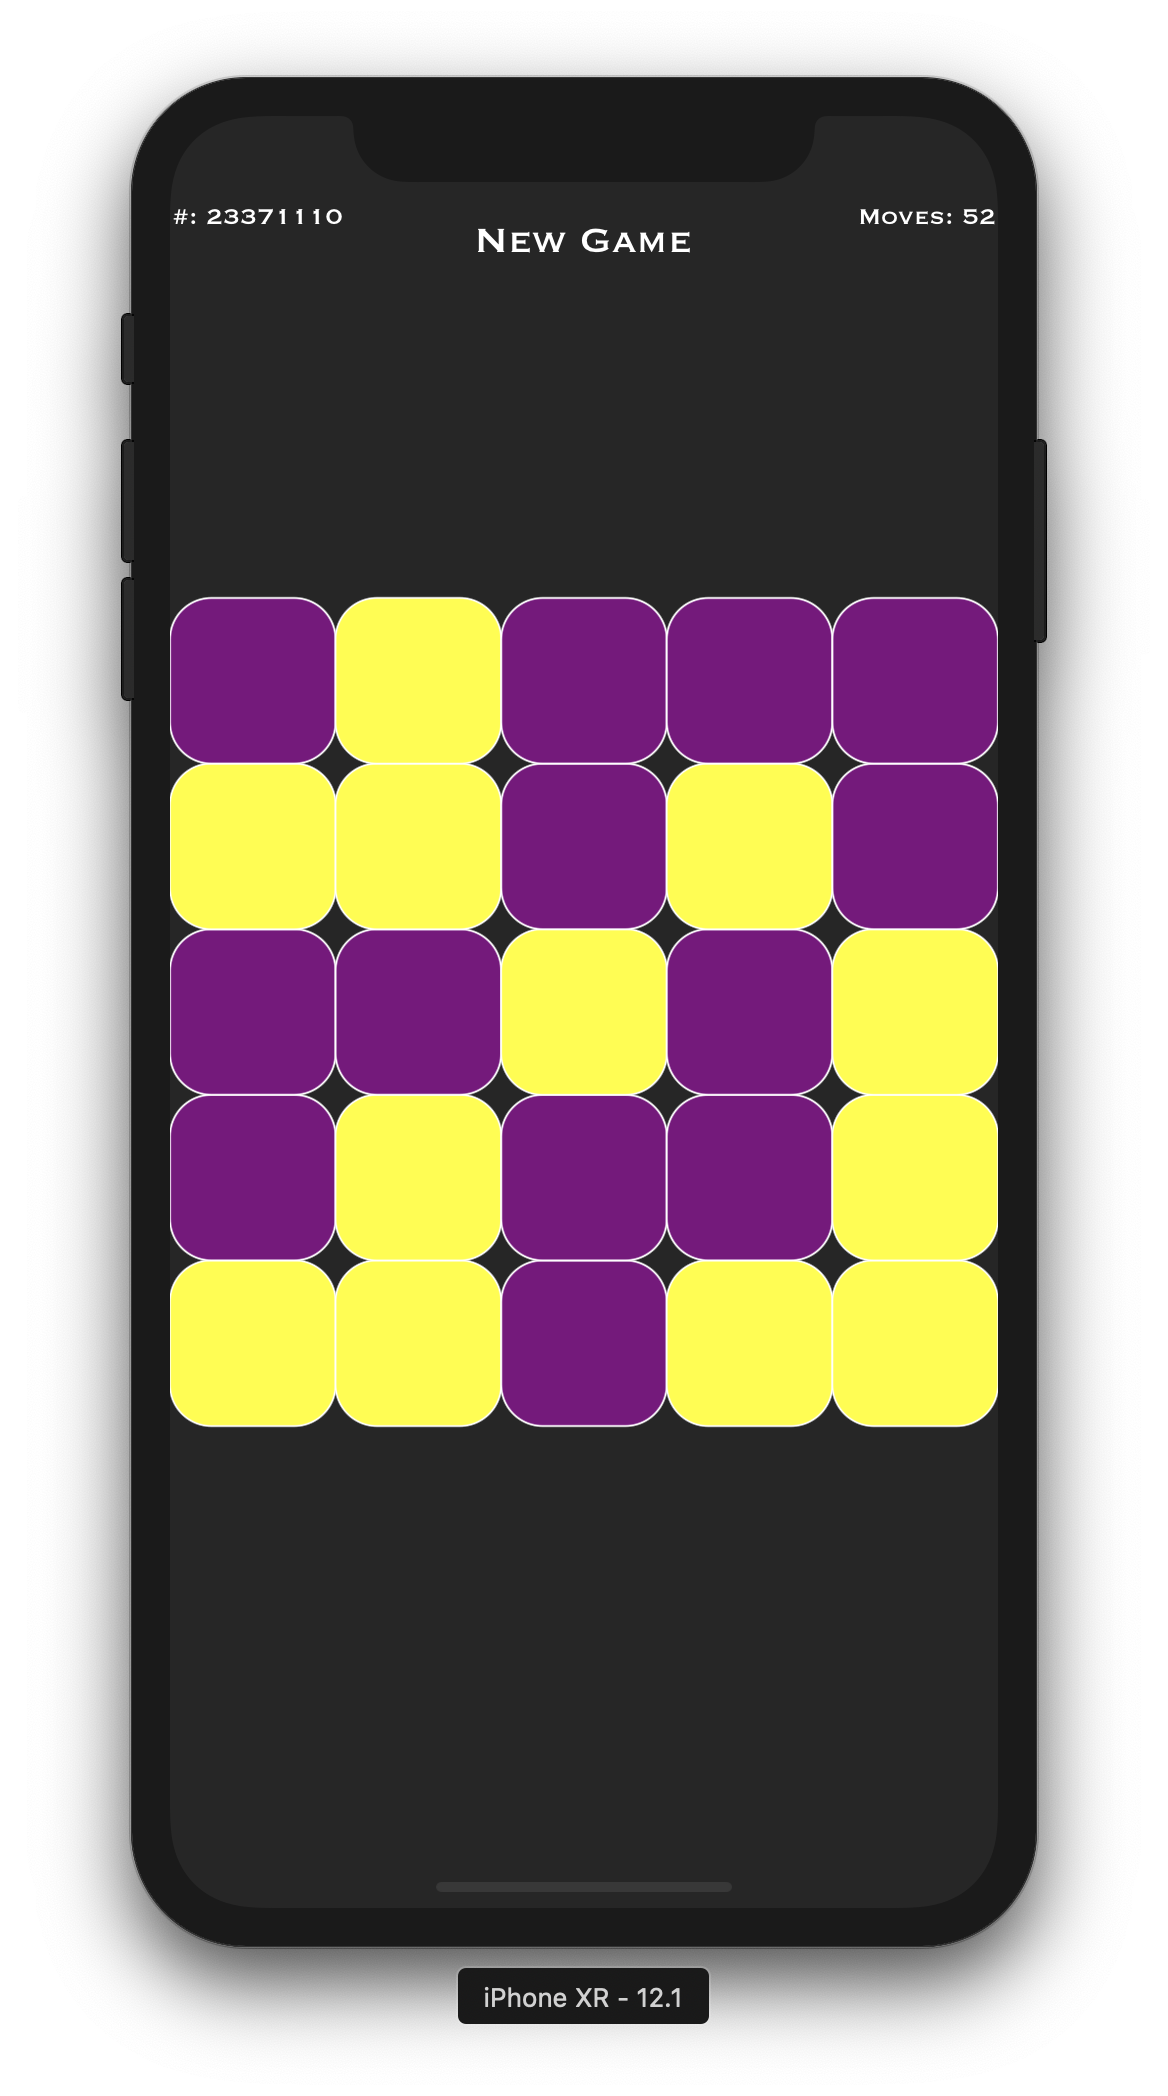 Lights out SpriteKit game on iPhone XR